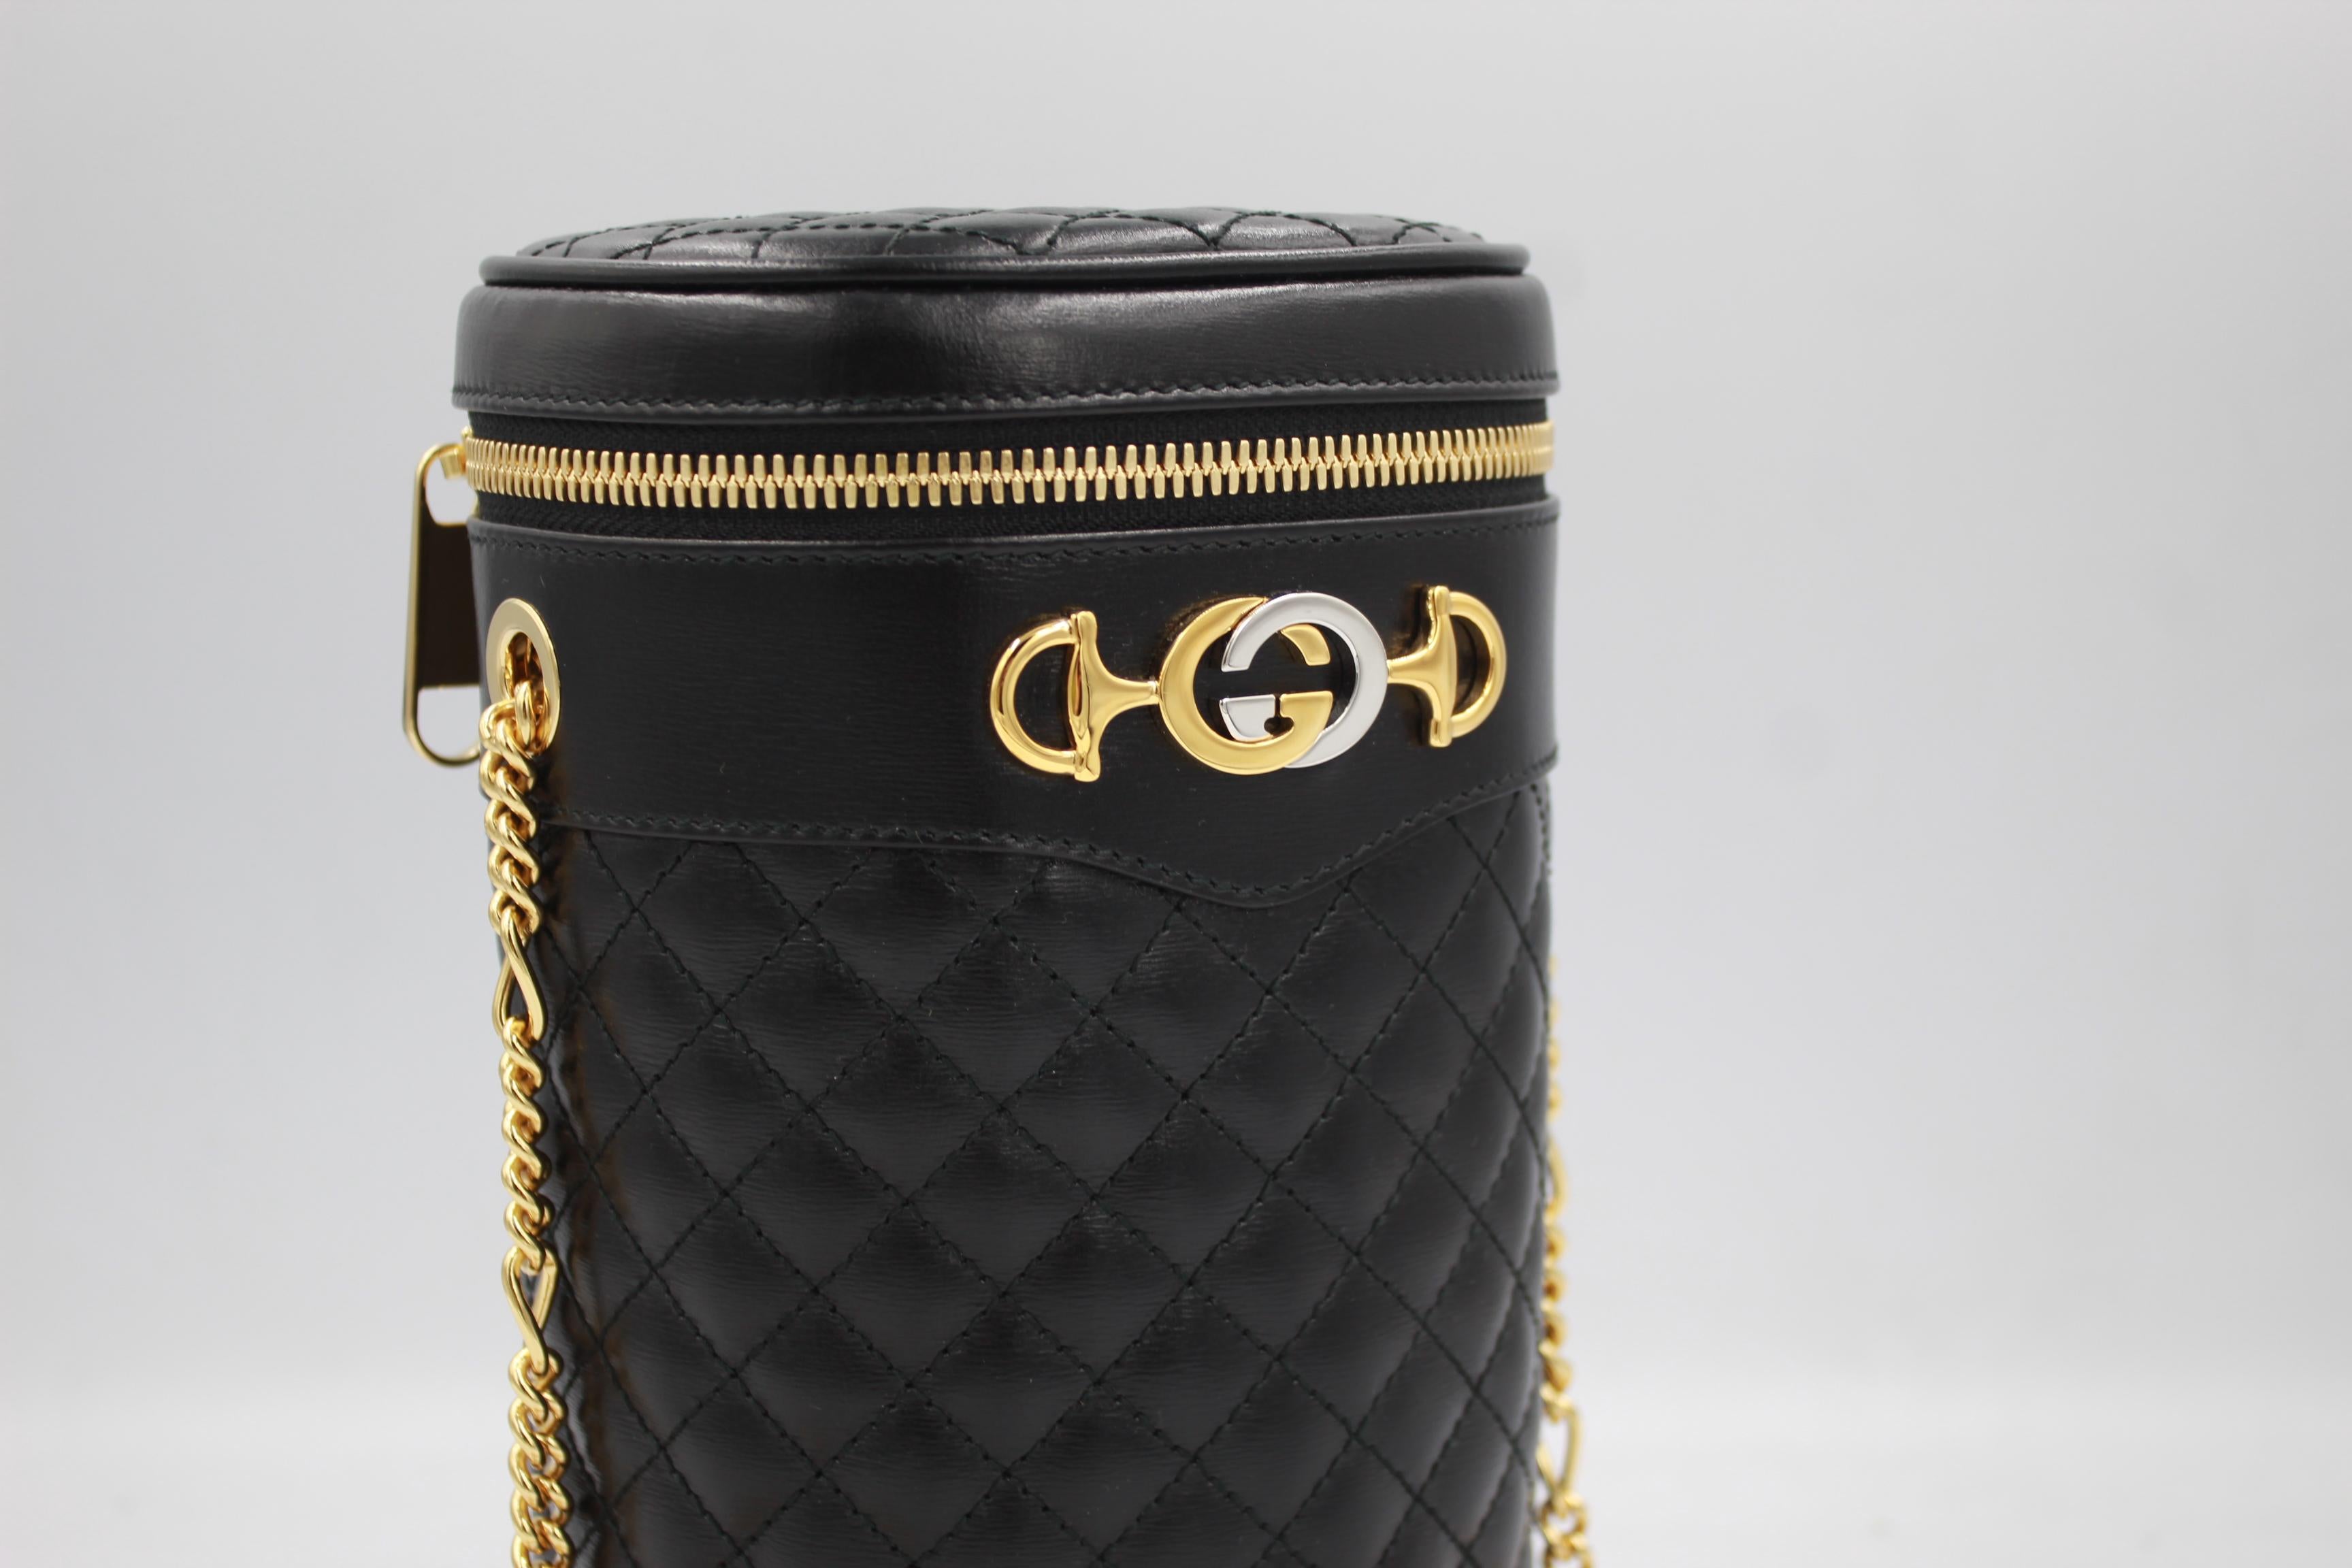 gucci belt bag with chain